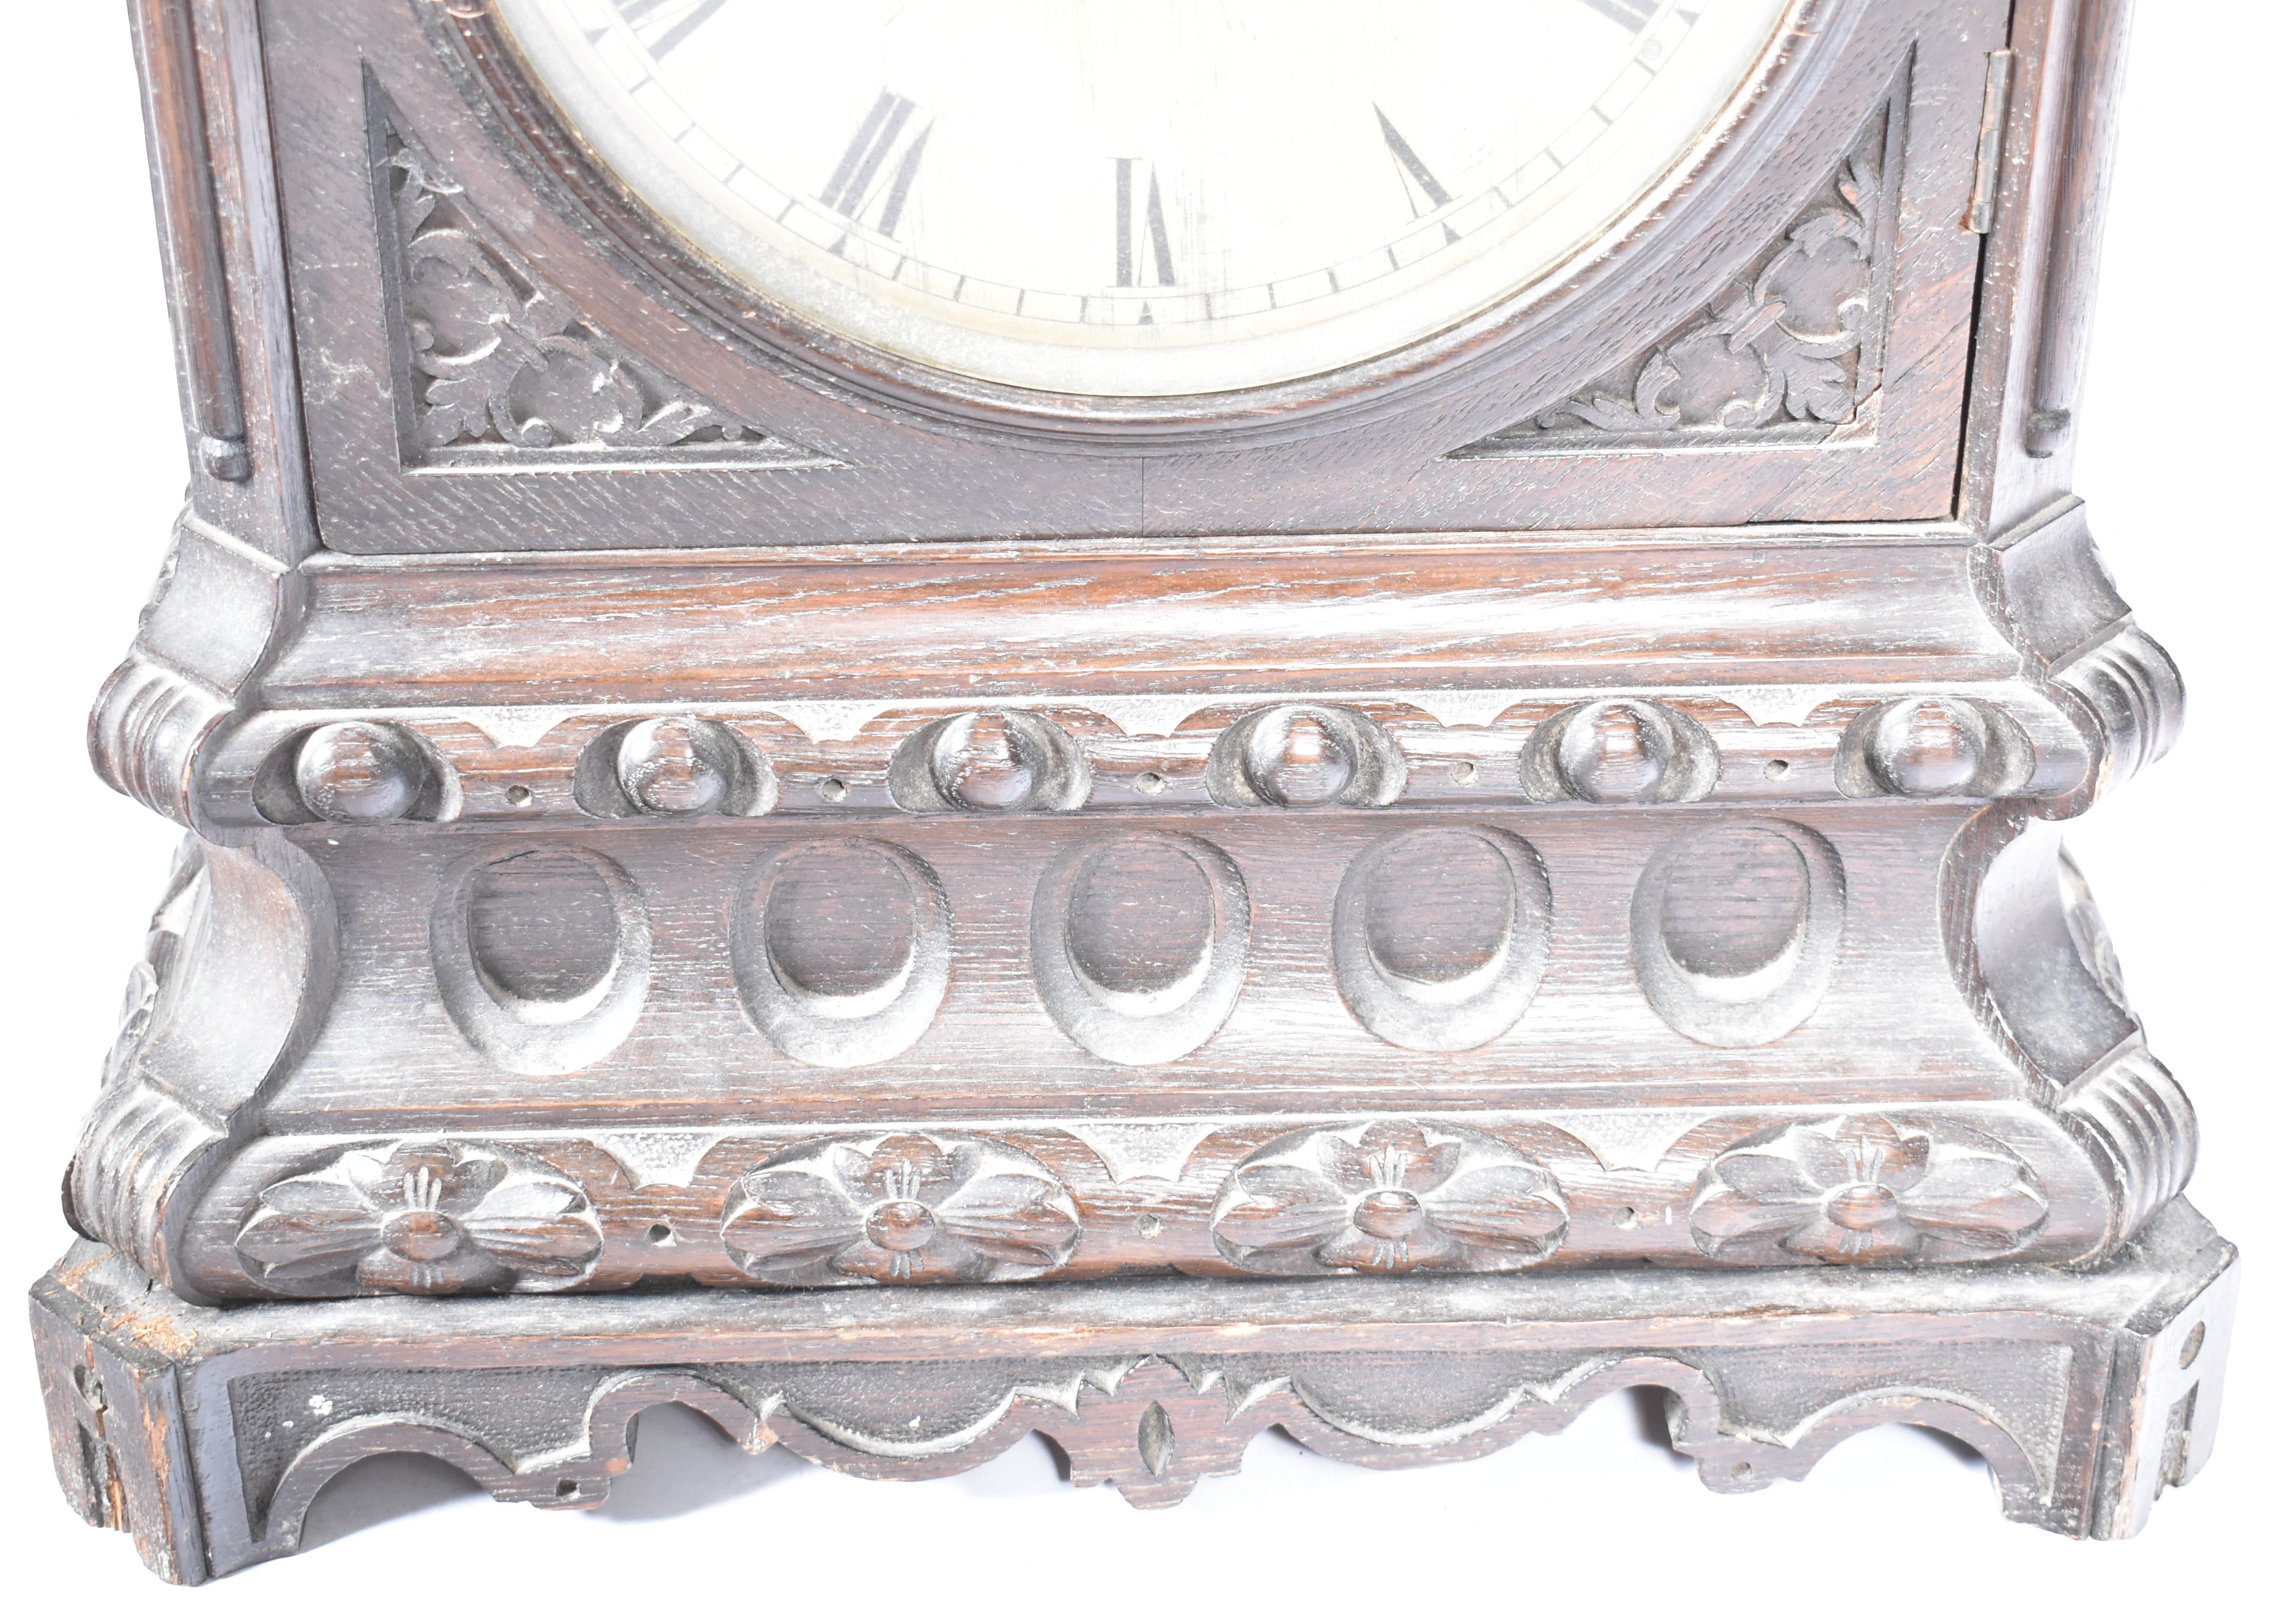 LARGE 19TH CENTURY GOTHIC REVIVAL 8 BELL FUSEE CLOCK - Image 5 of 10